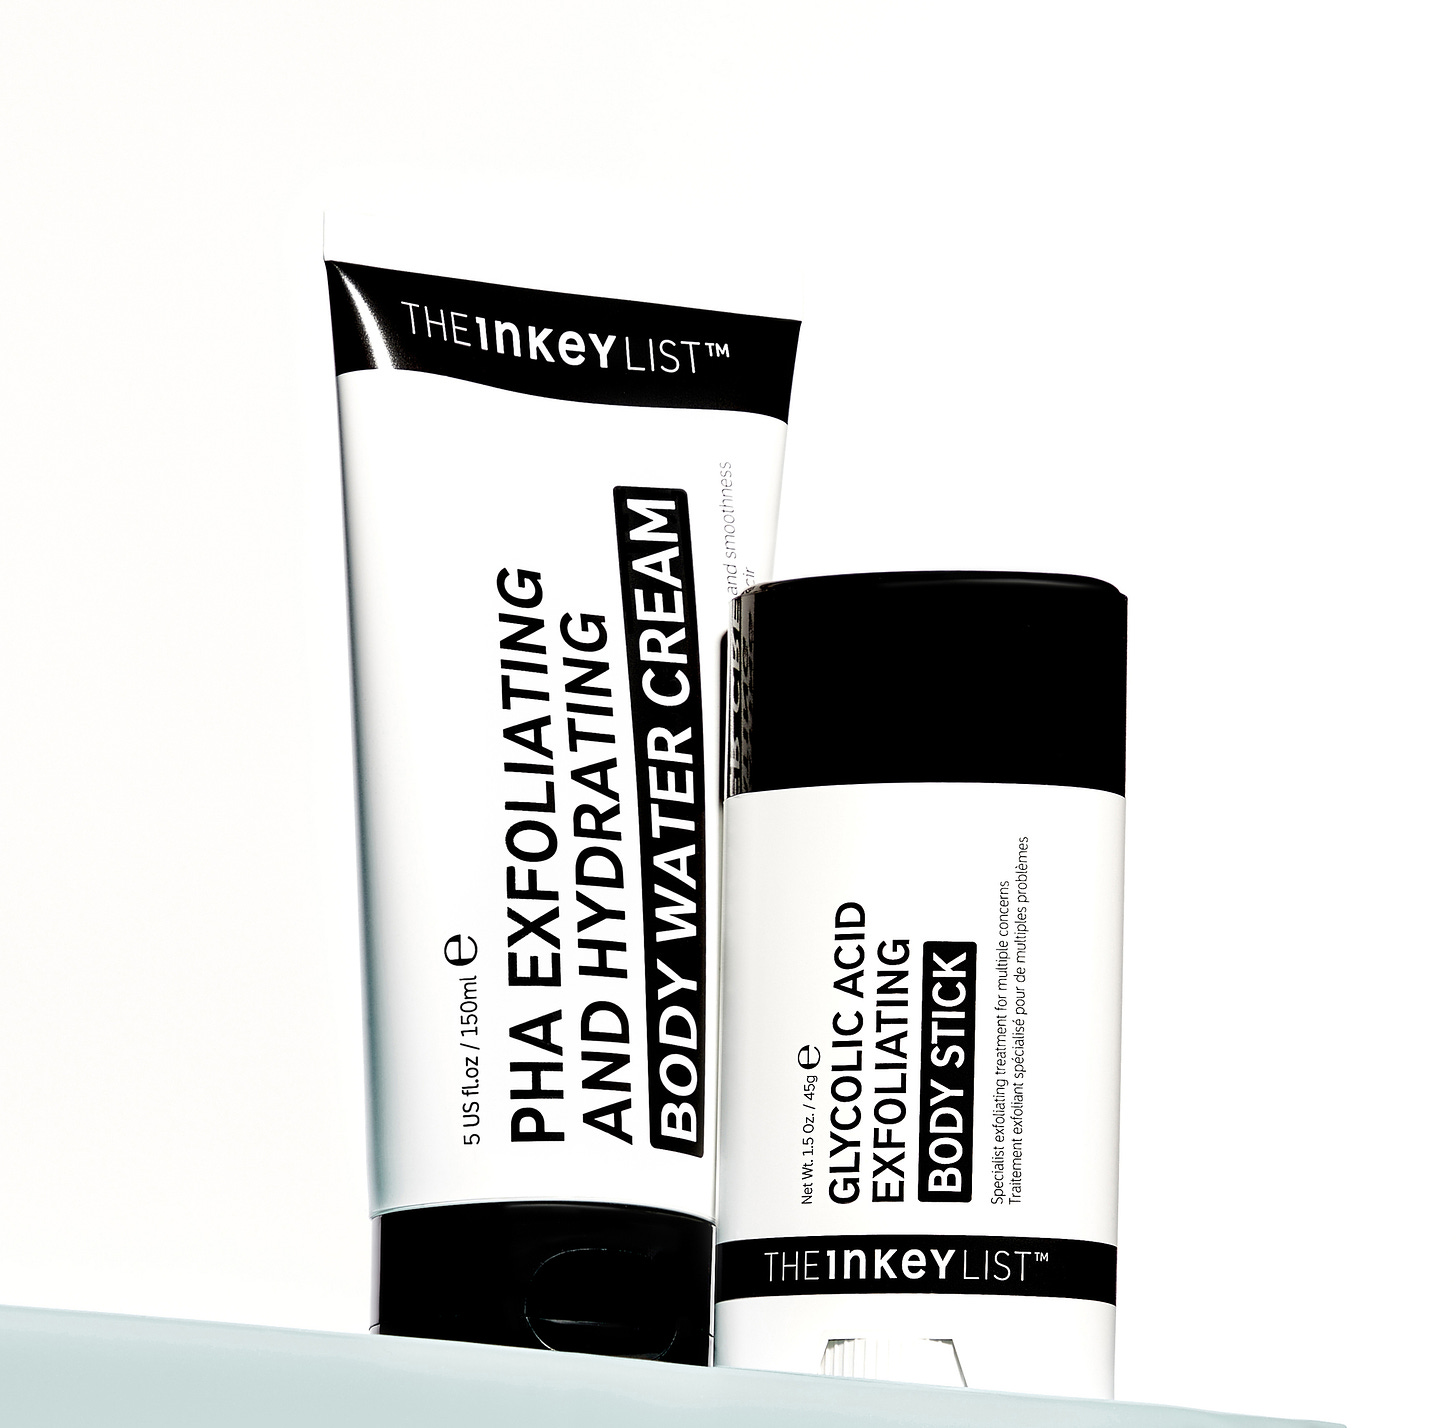 Body Care From The Inkey List to Sell in Sephora